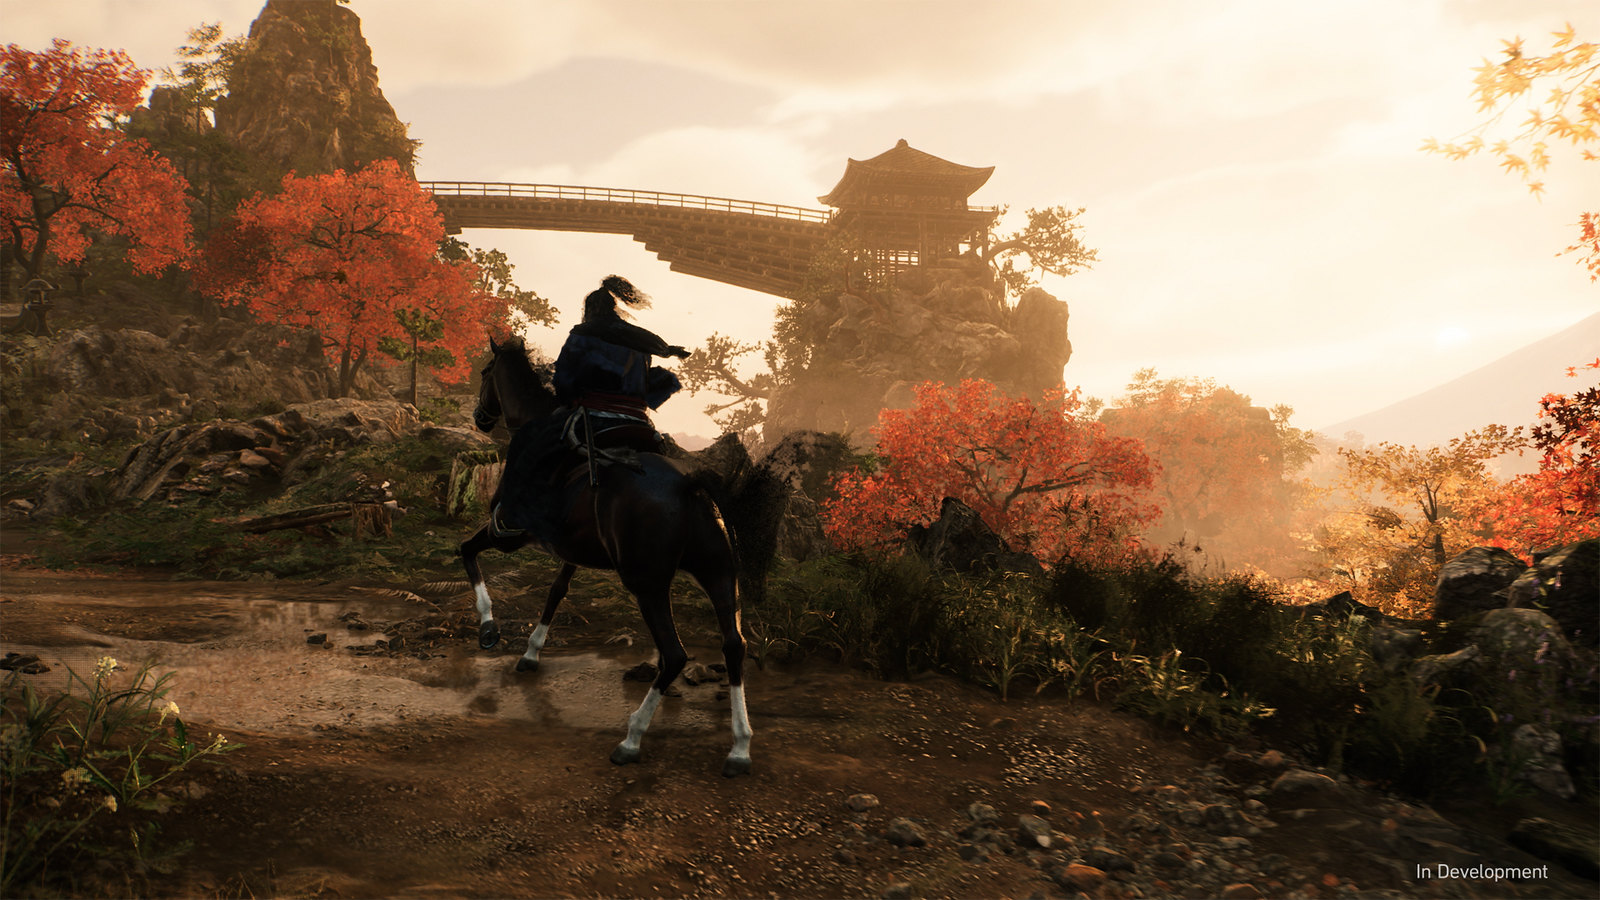 Rise of the Ronin - Rutherford Alcock Avatar DLC NA PS4/PS5